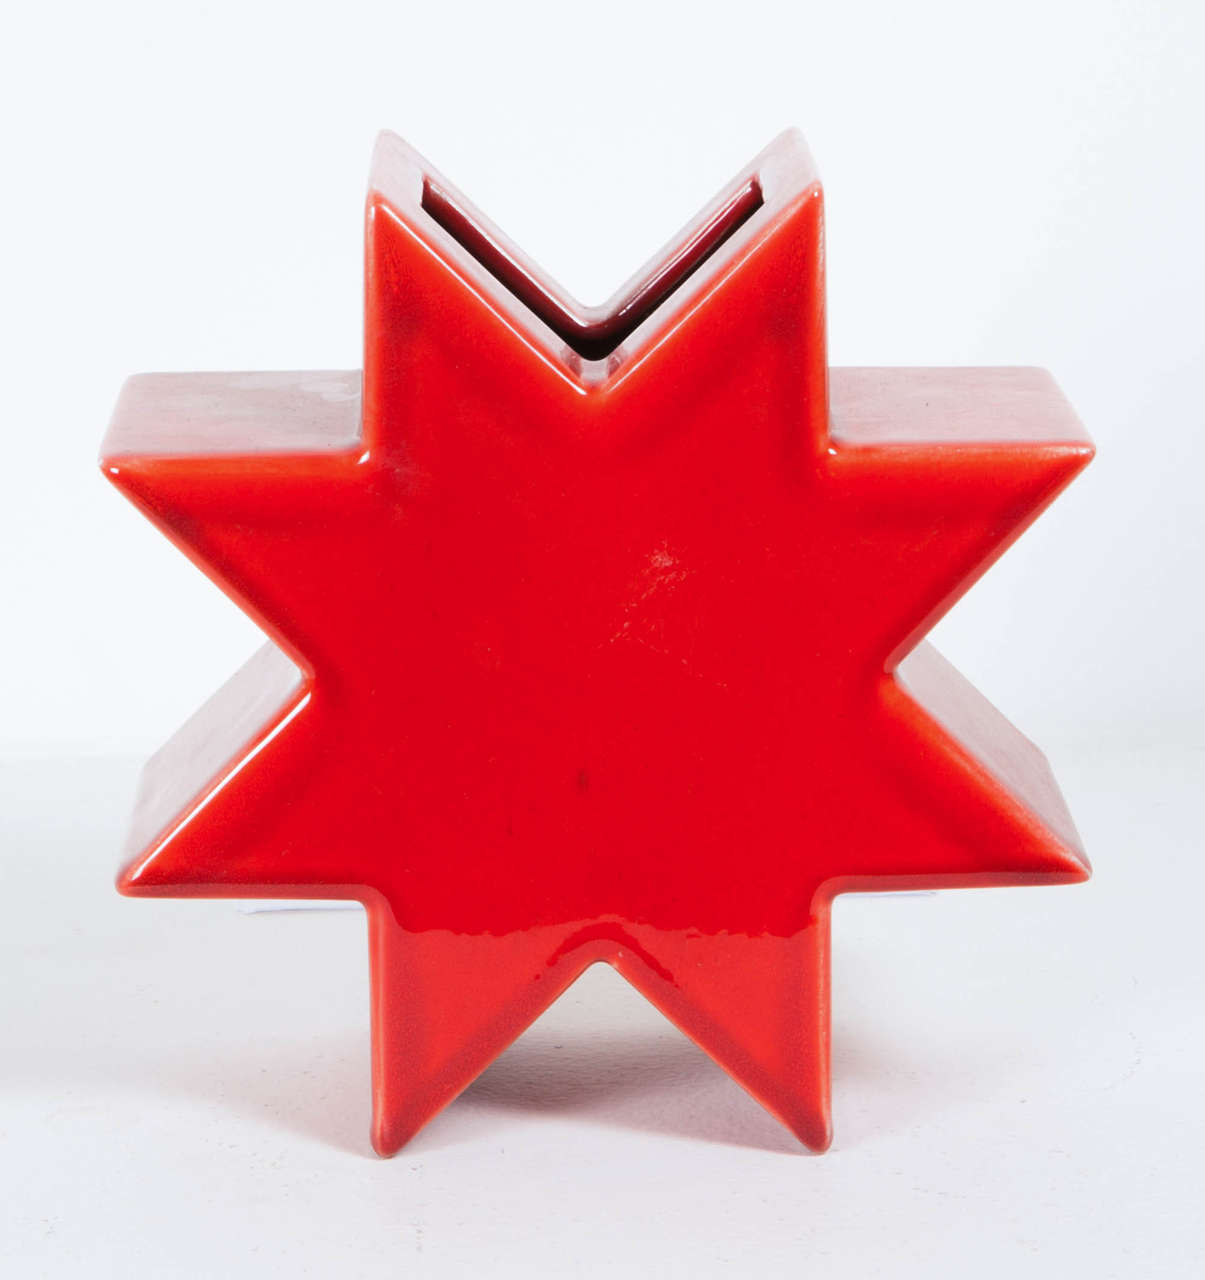 Ettore Sottsass (1917-2007) vase in red glazed earthenware representing a star with a rectangular extruded shape. Enameled signature under the base 'A. Sarri Ettore Sottsass.' Model created in1981.
 
This piece is iconic of the 1980s Italian